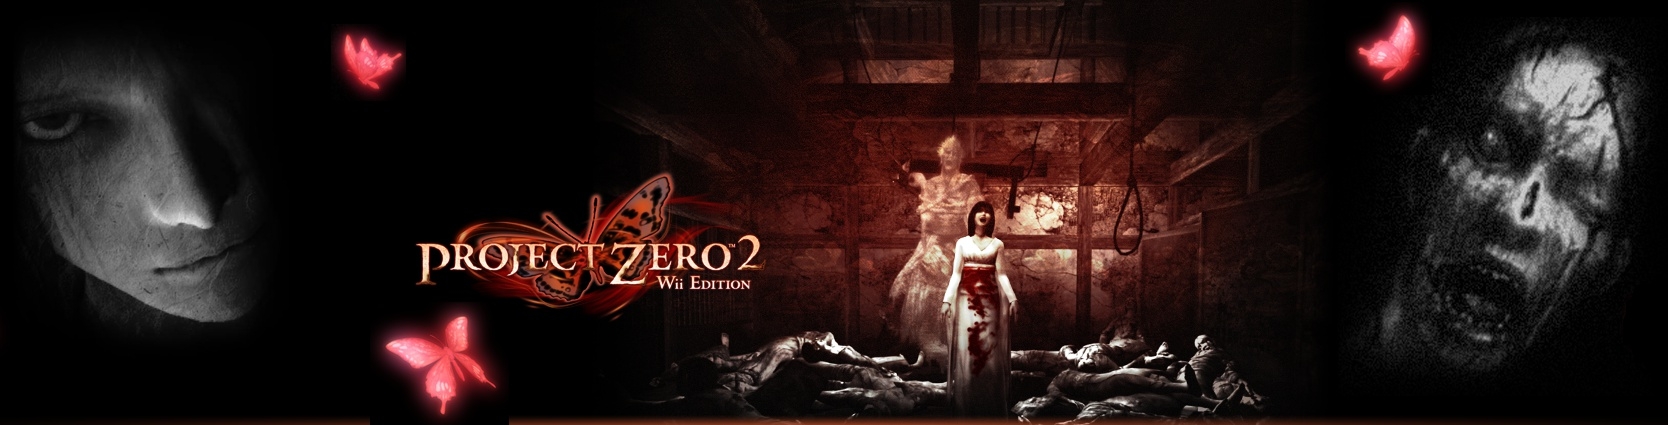 Banner Project Zero 2 Wii Edition